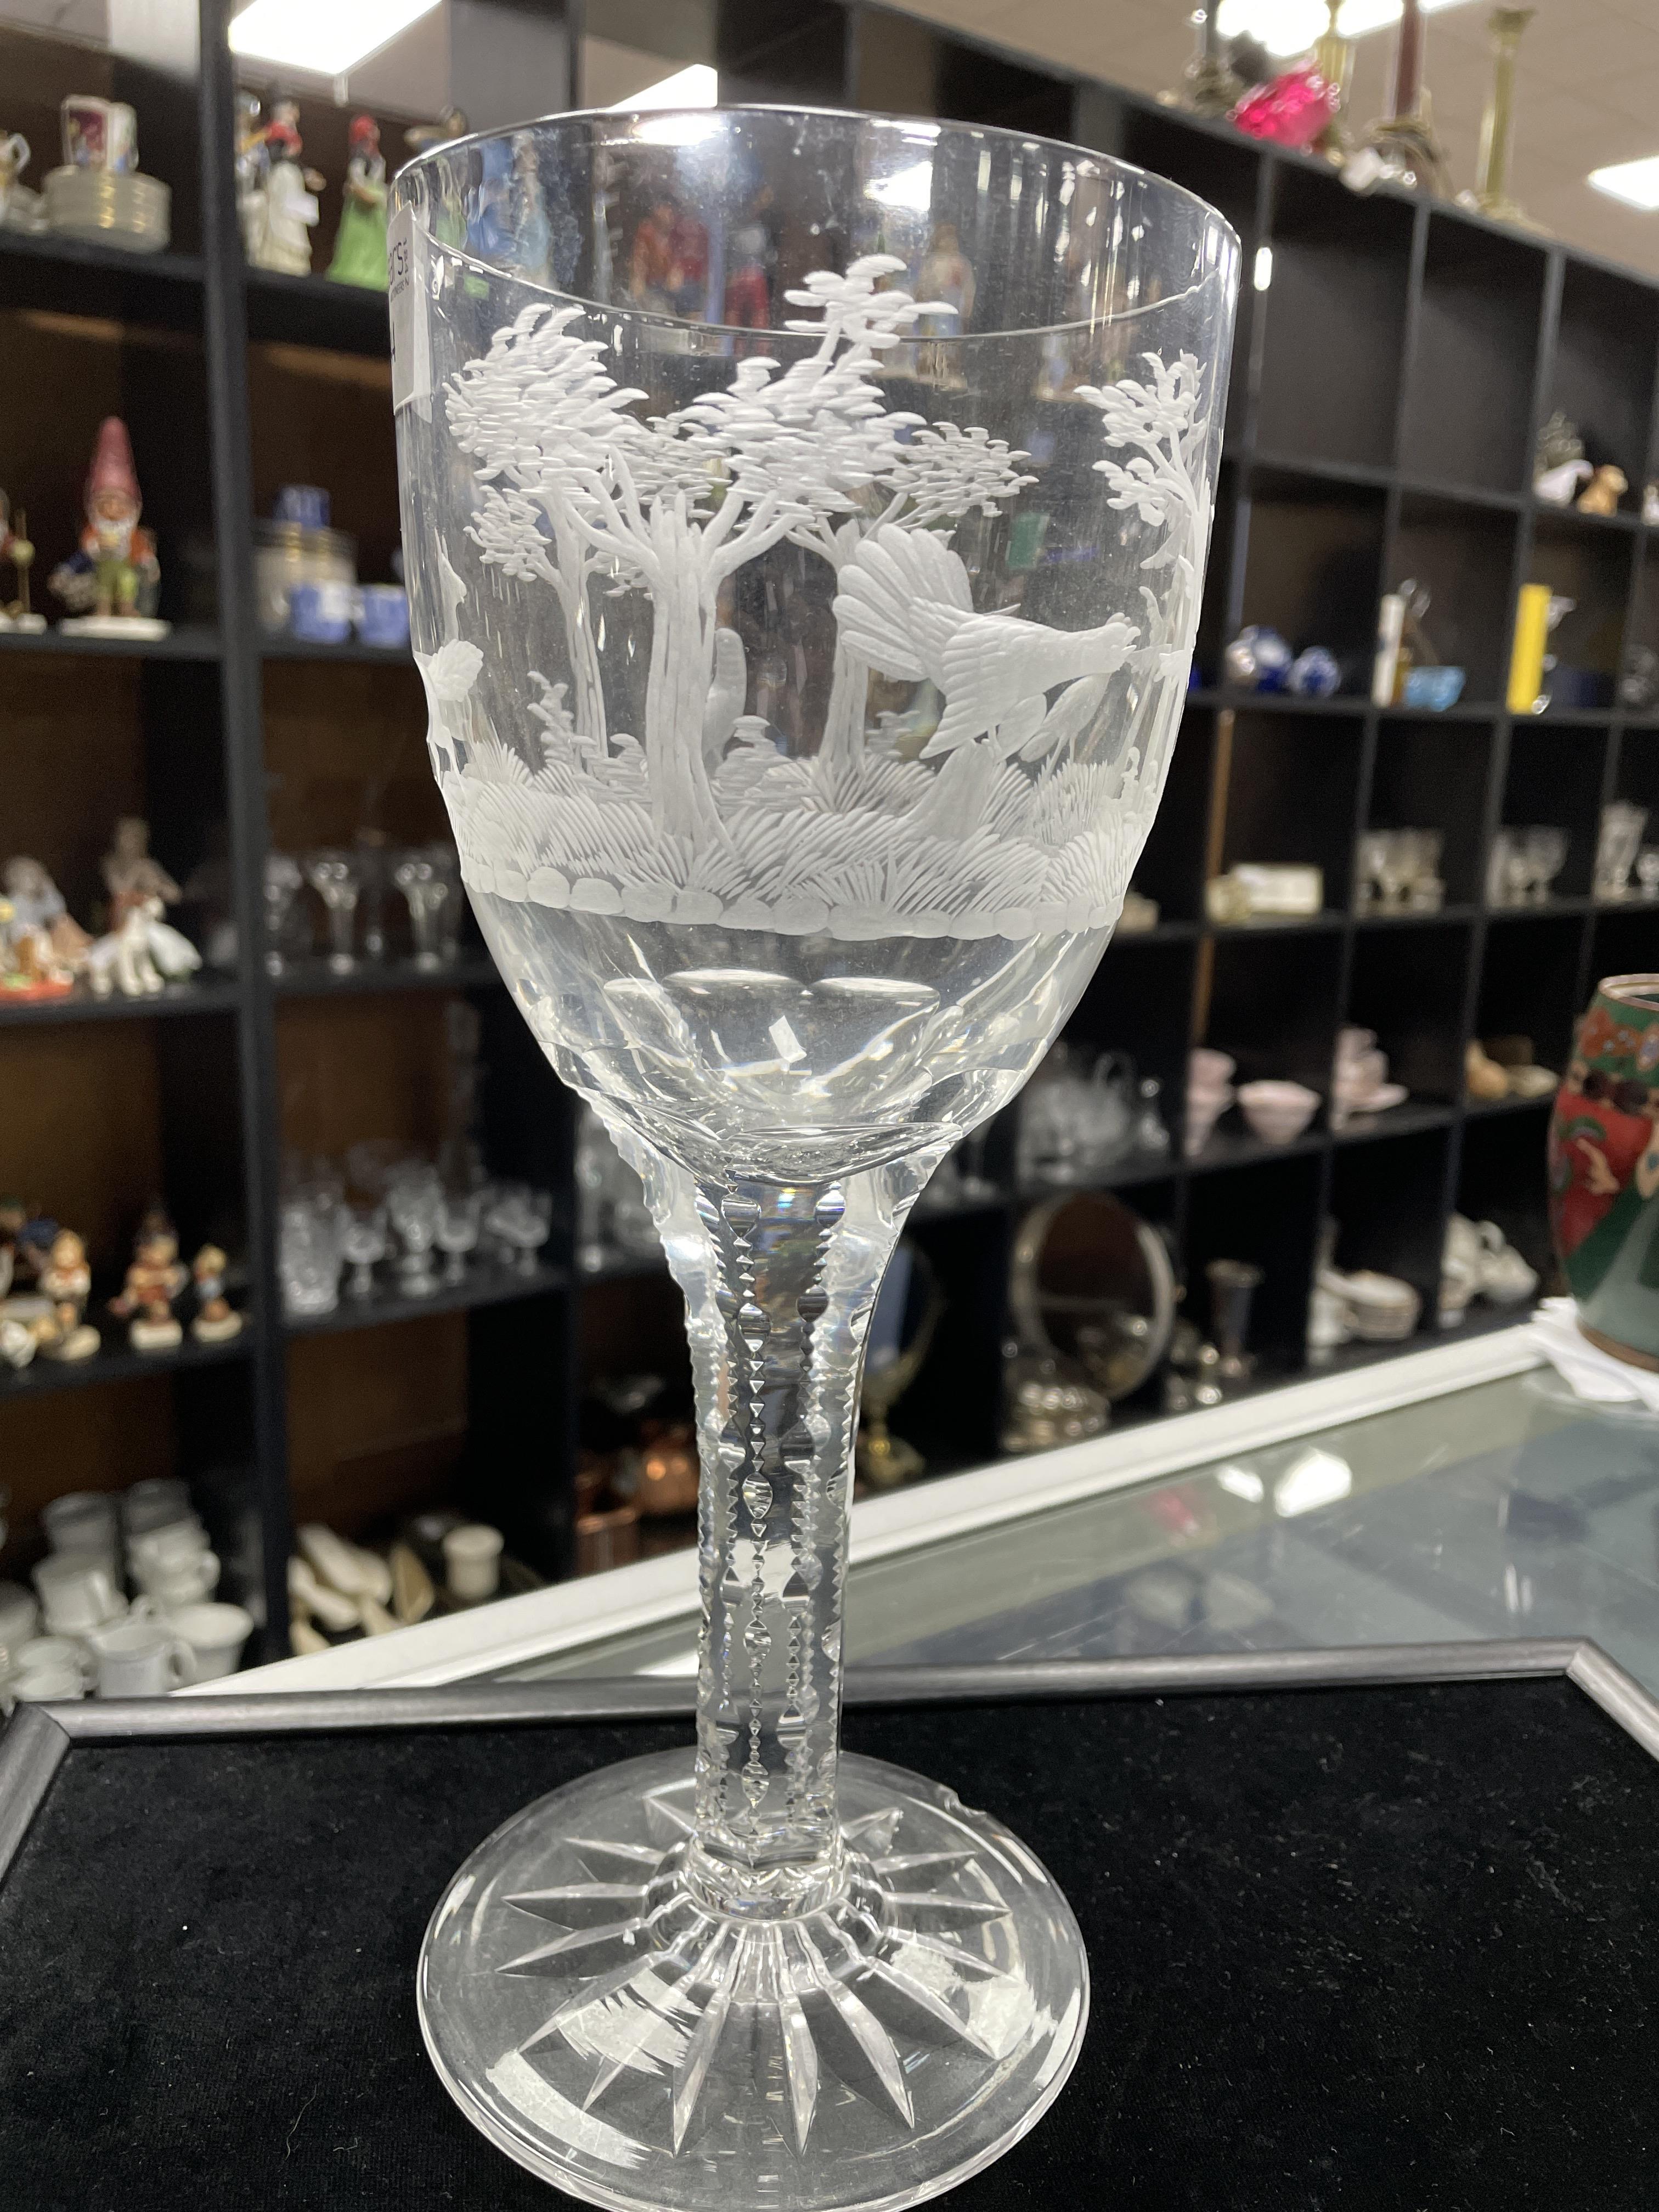 AN ETCHED WINE GLASS OF LARGE PROPORTIONS - Image 2 of 2